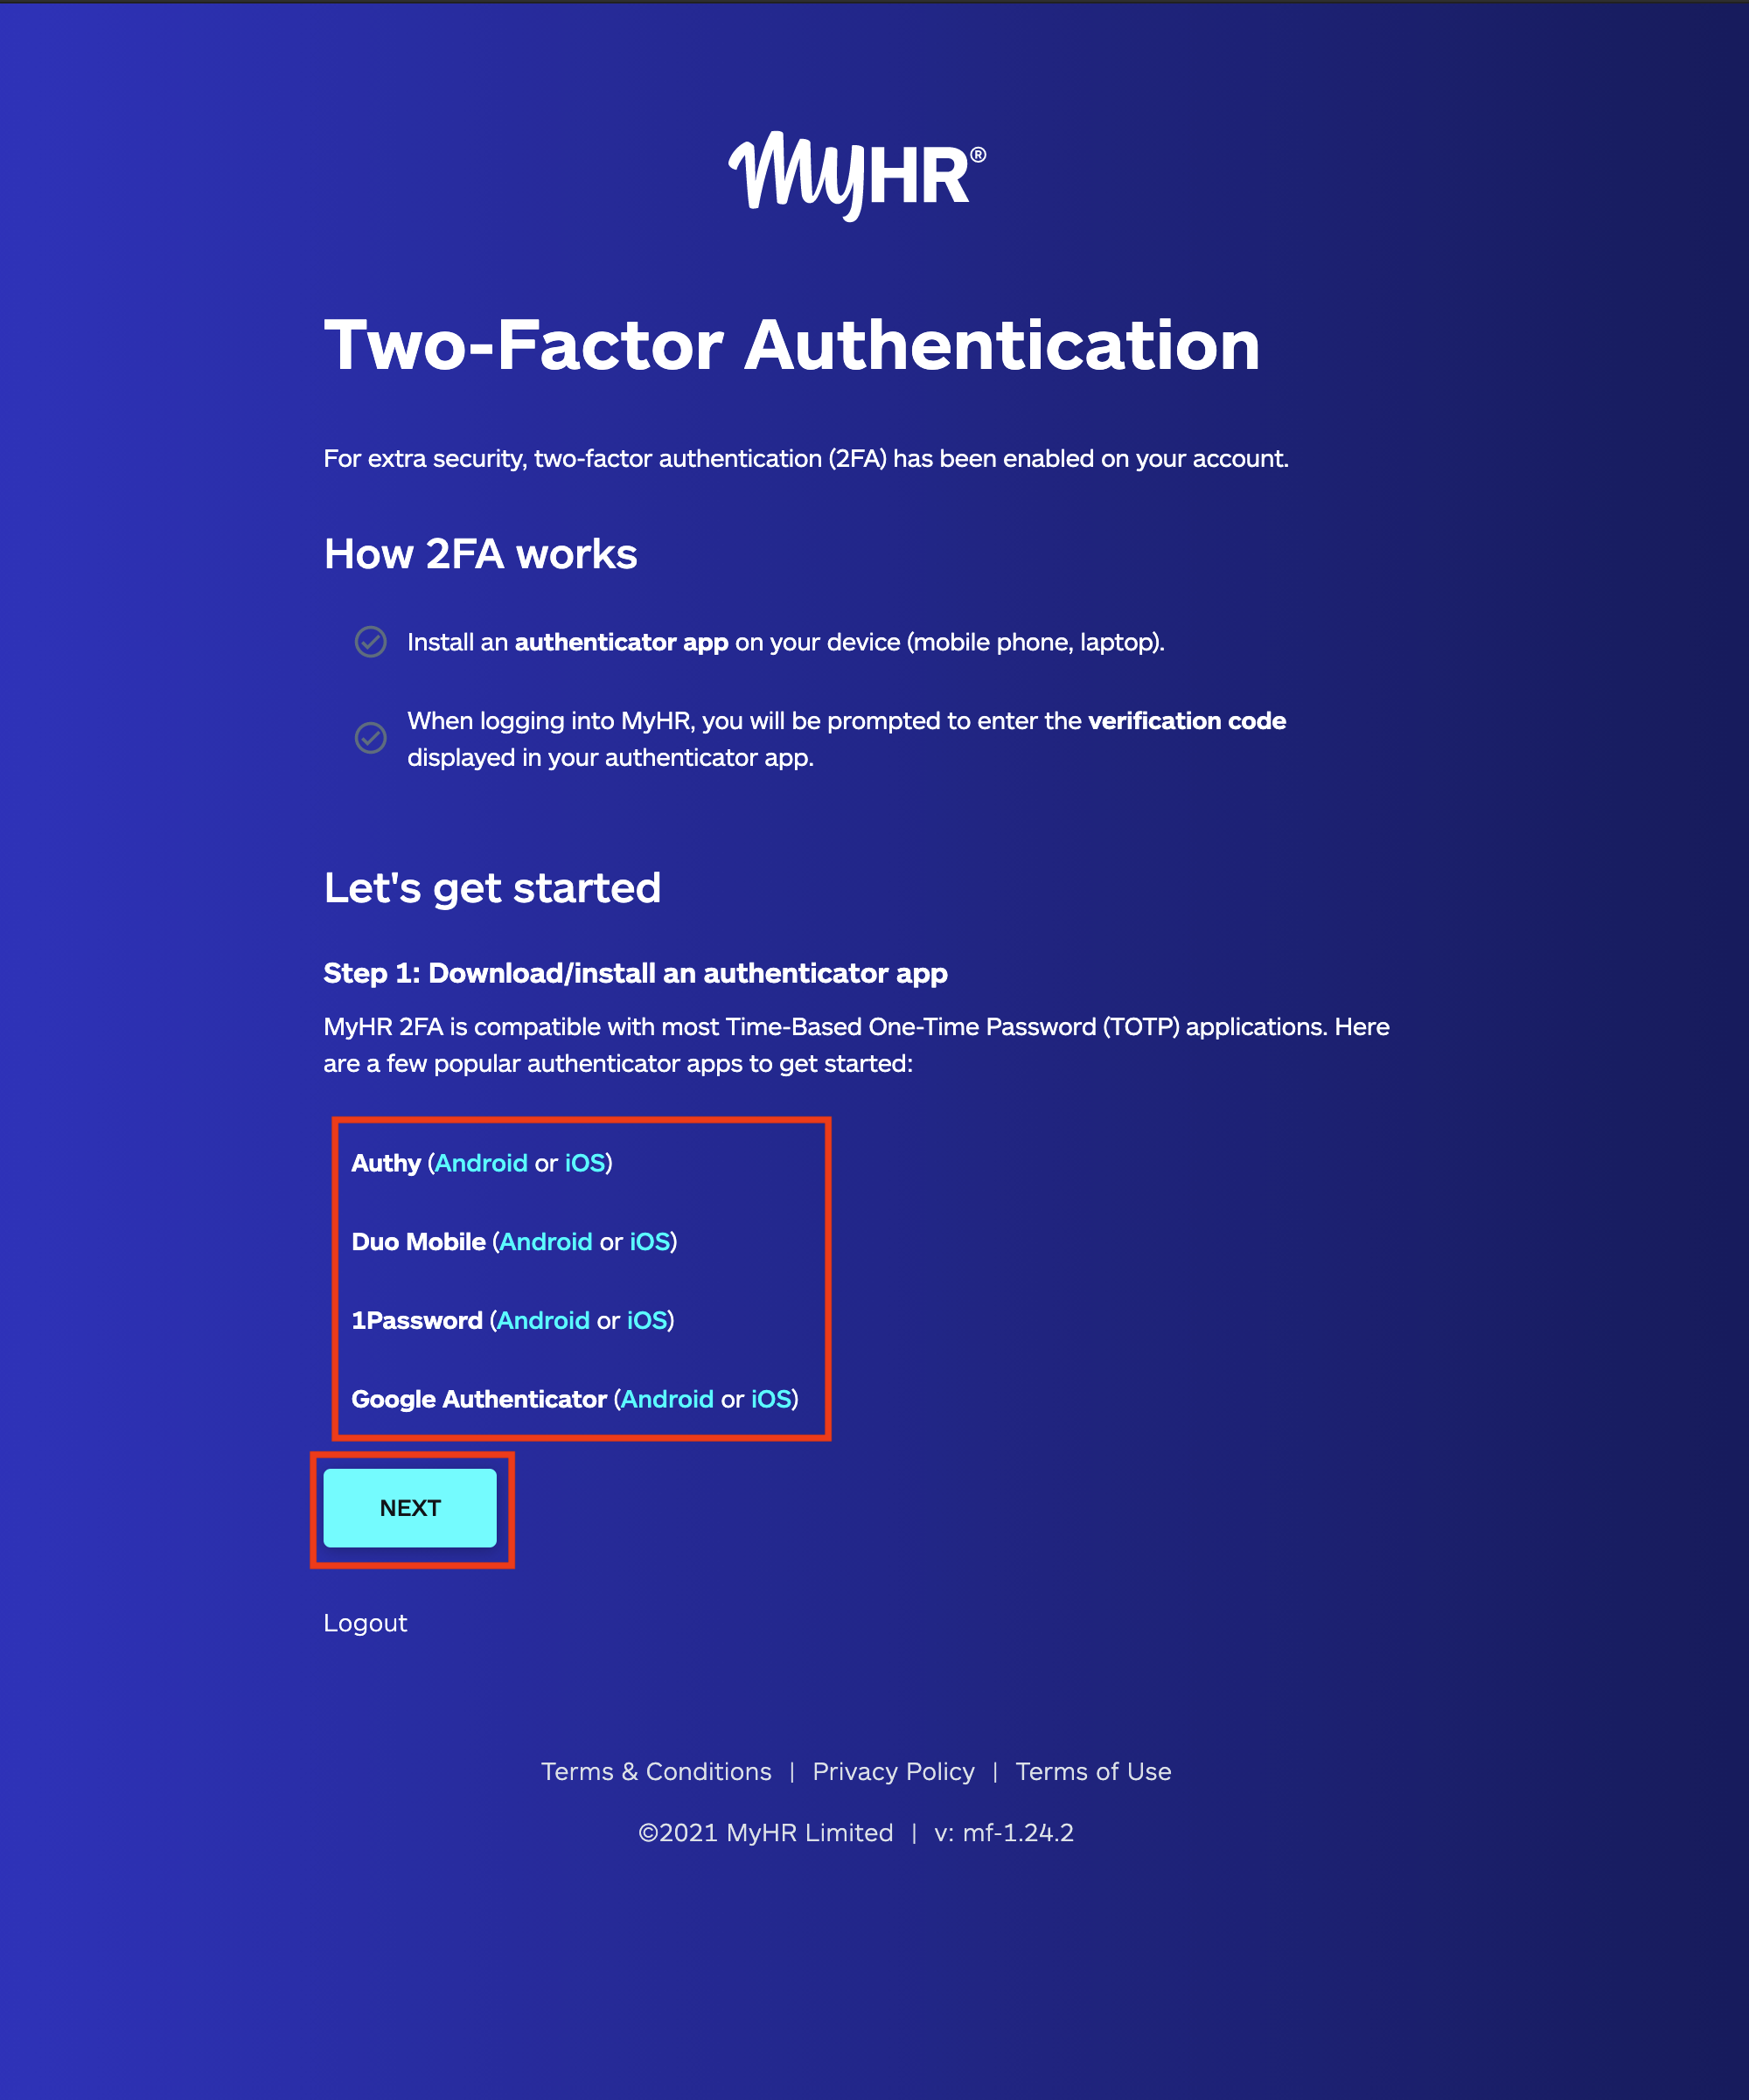 Two-factor authentication now available for all accounts